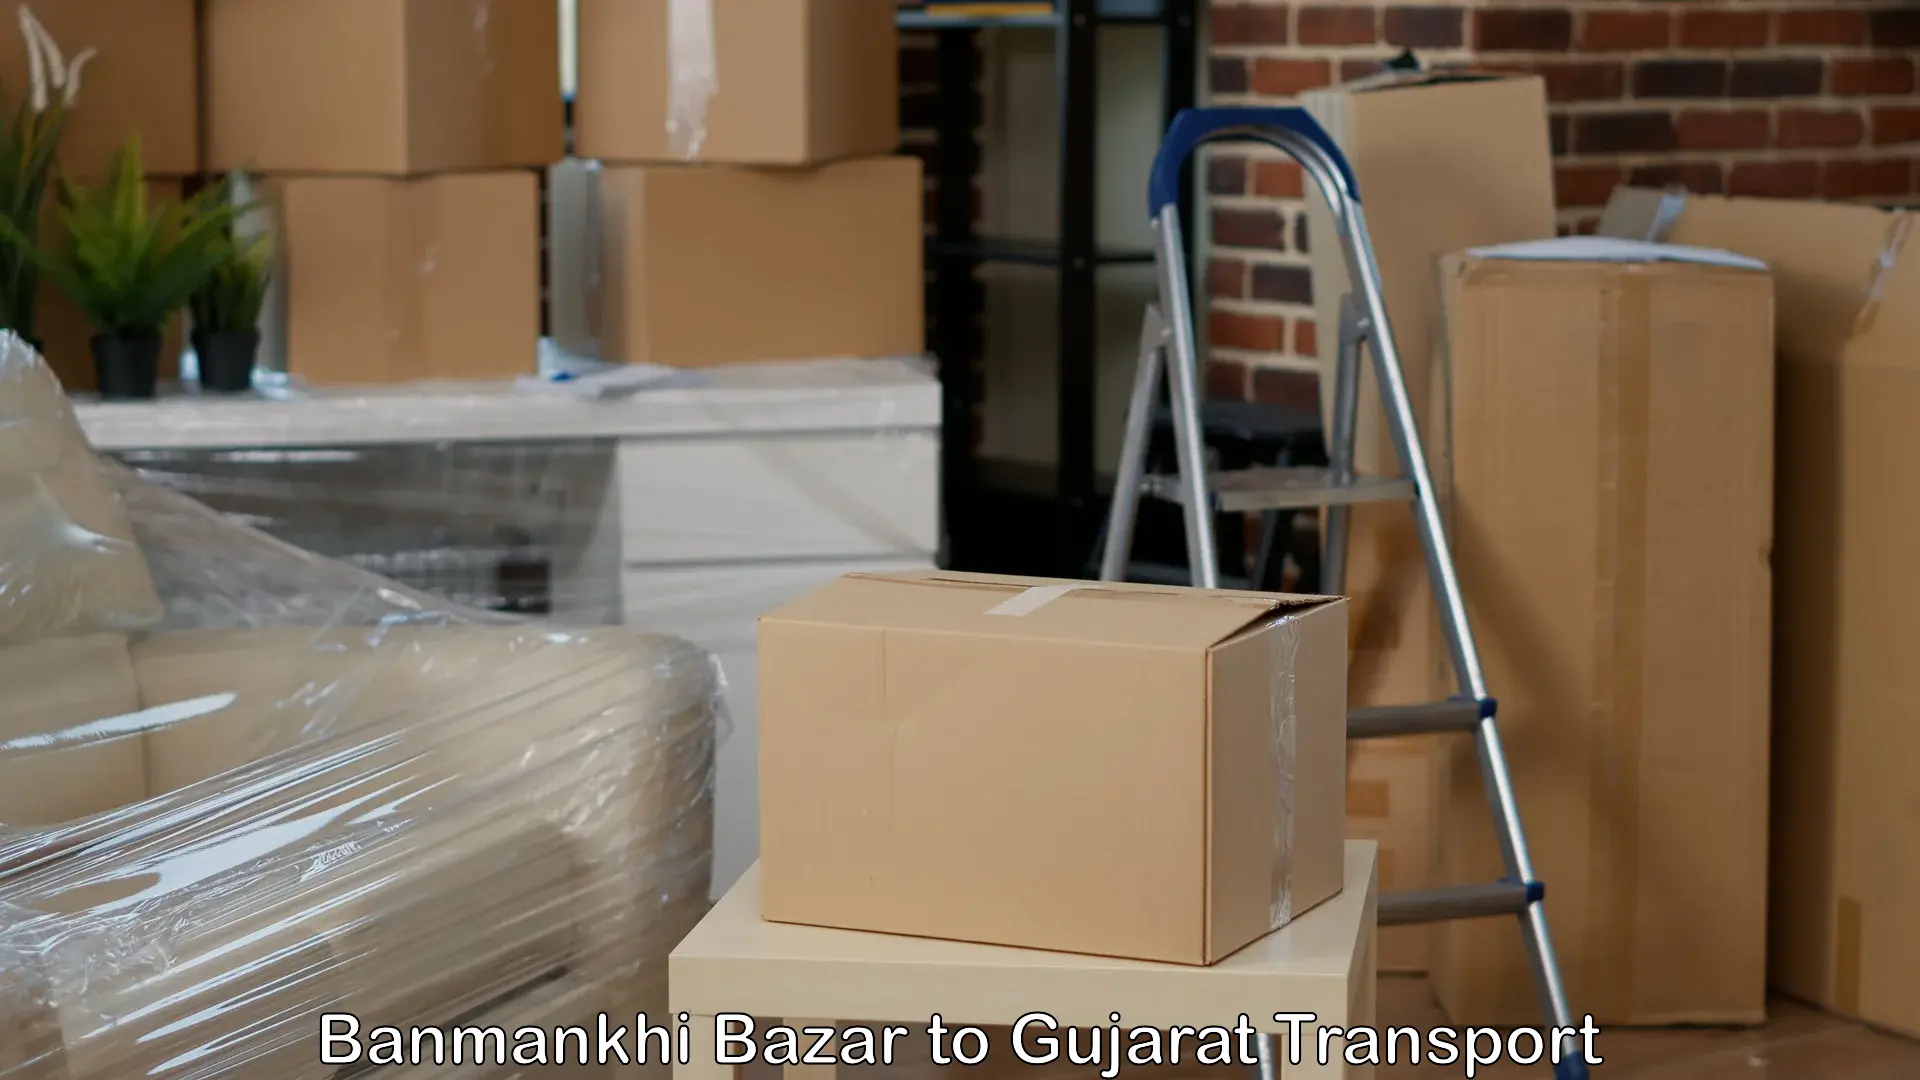 Air freight transport services Banmankhi Bazar to Sami